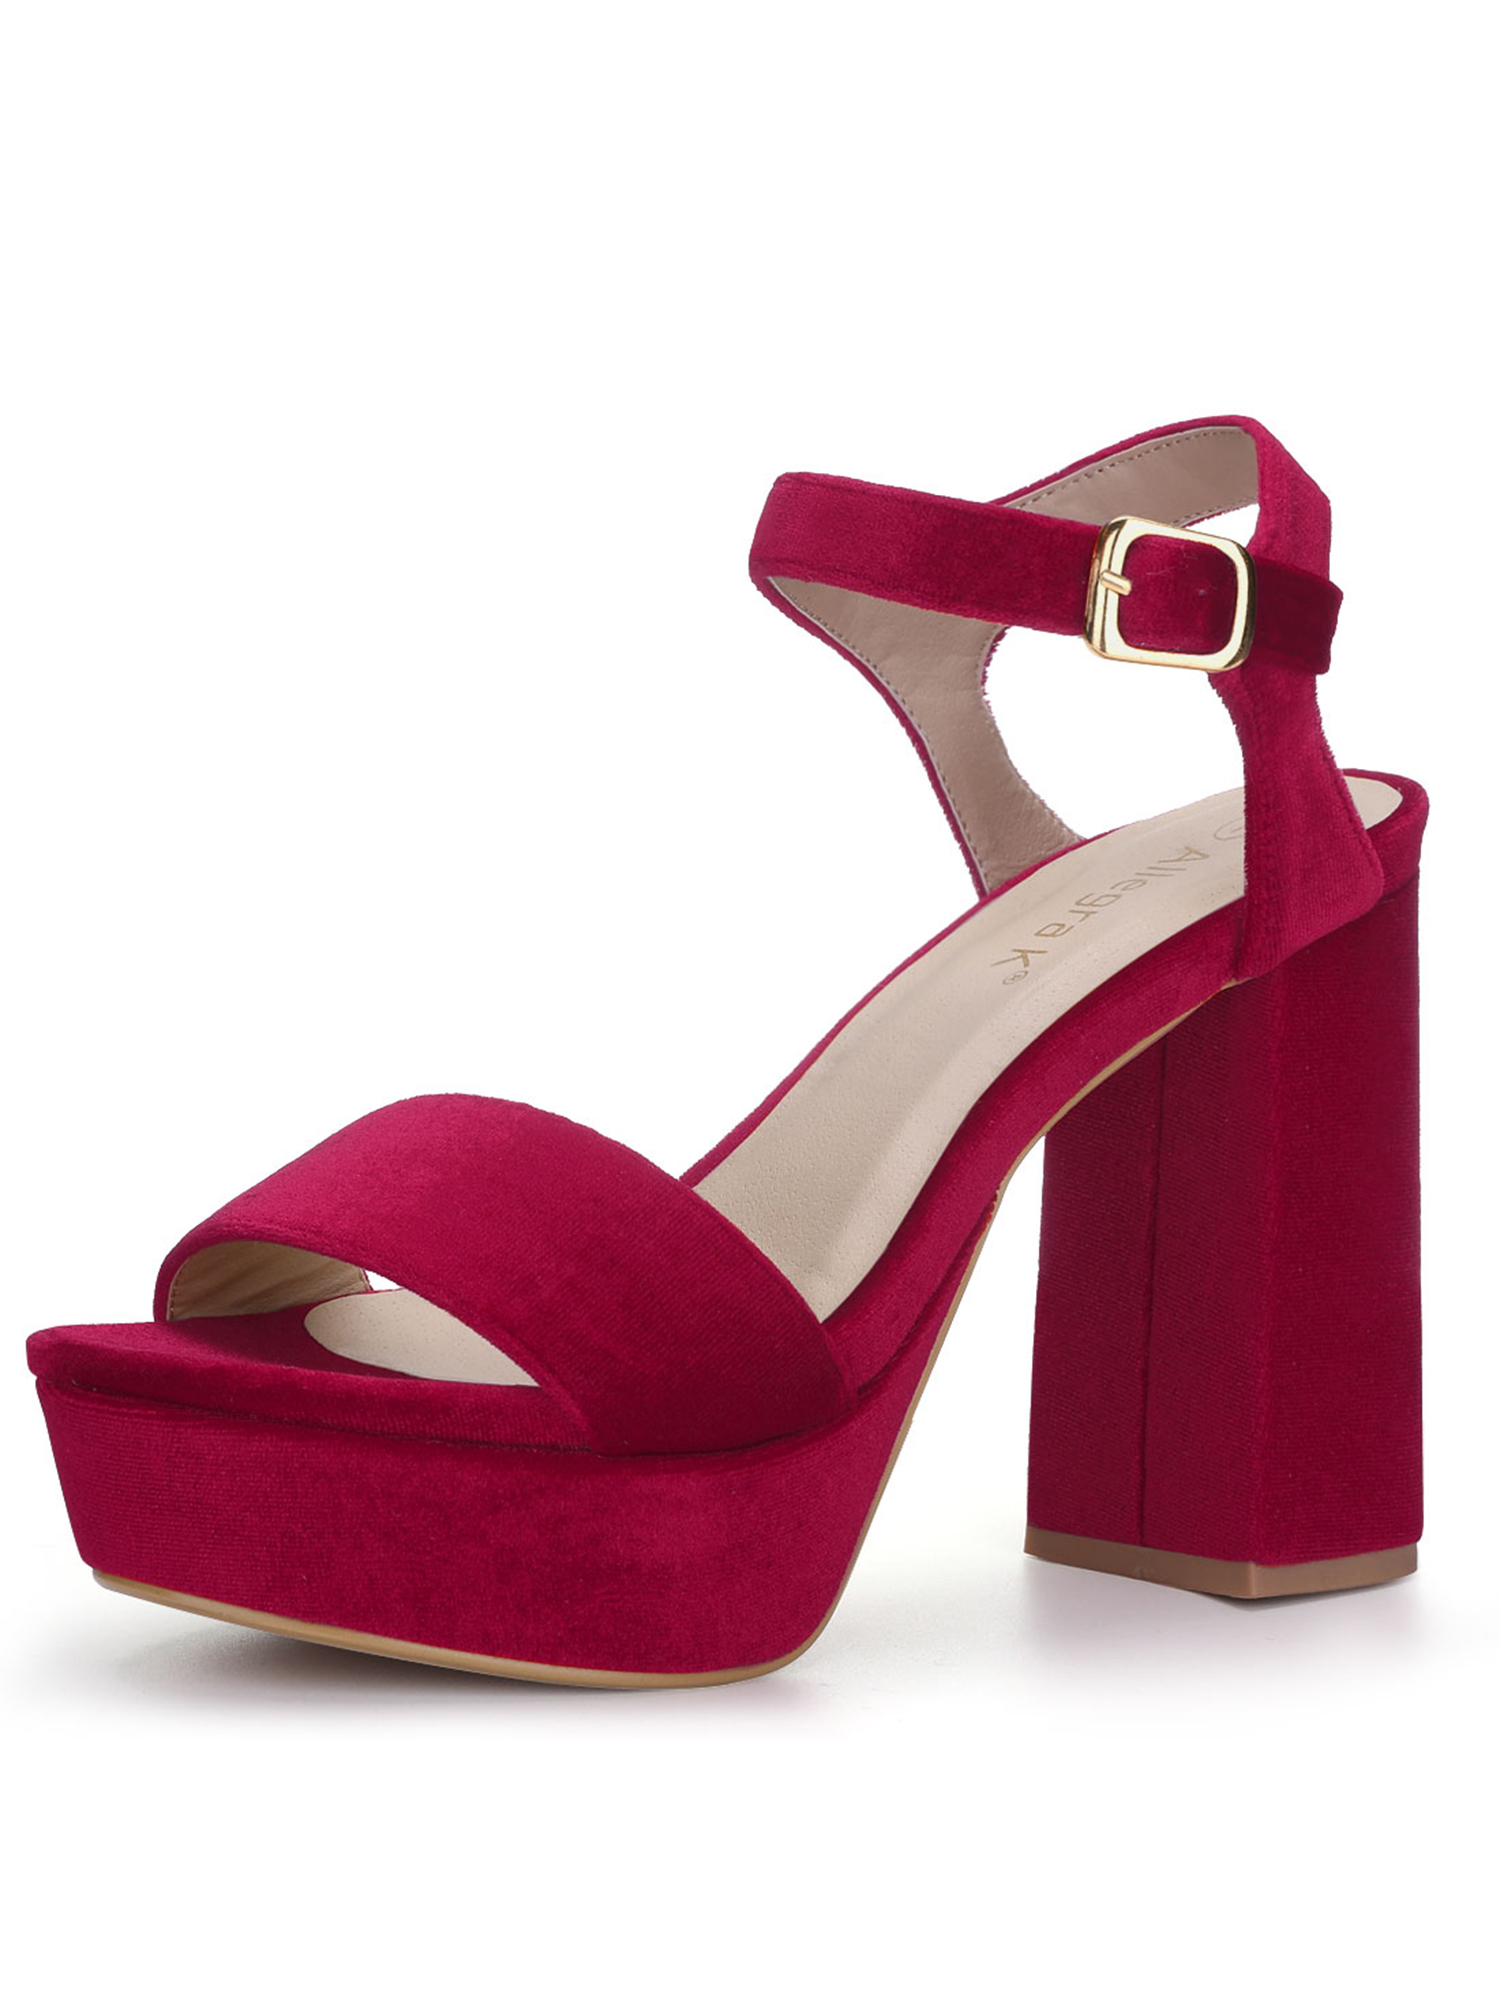 red platform shoes with ankle strap